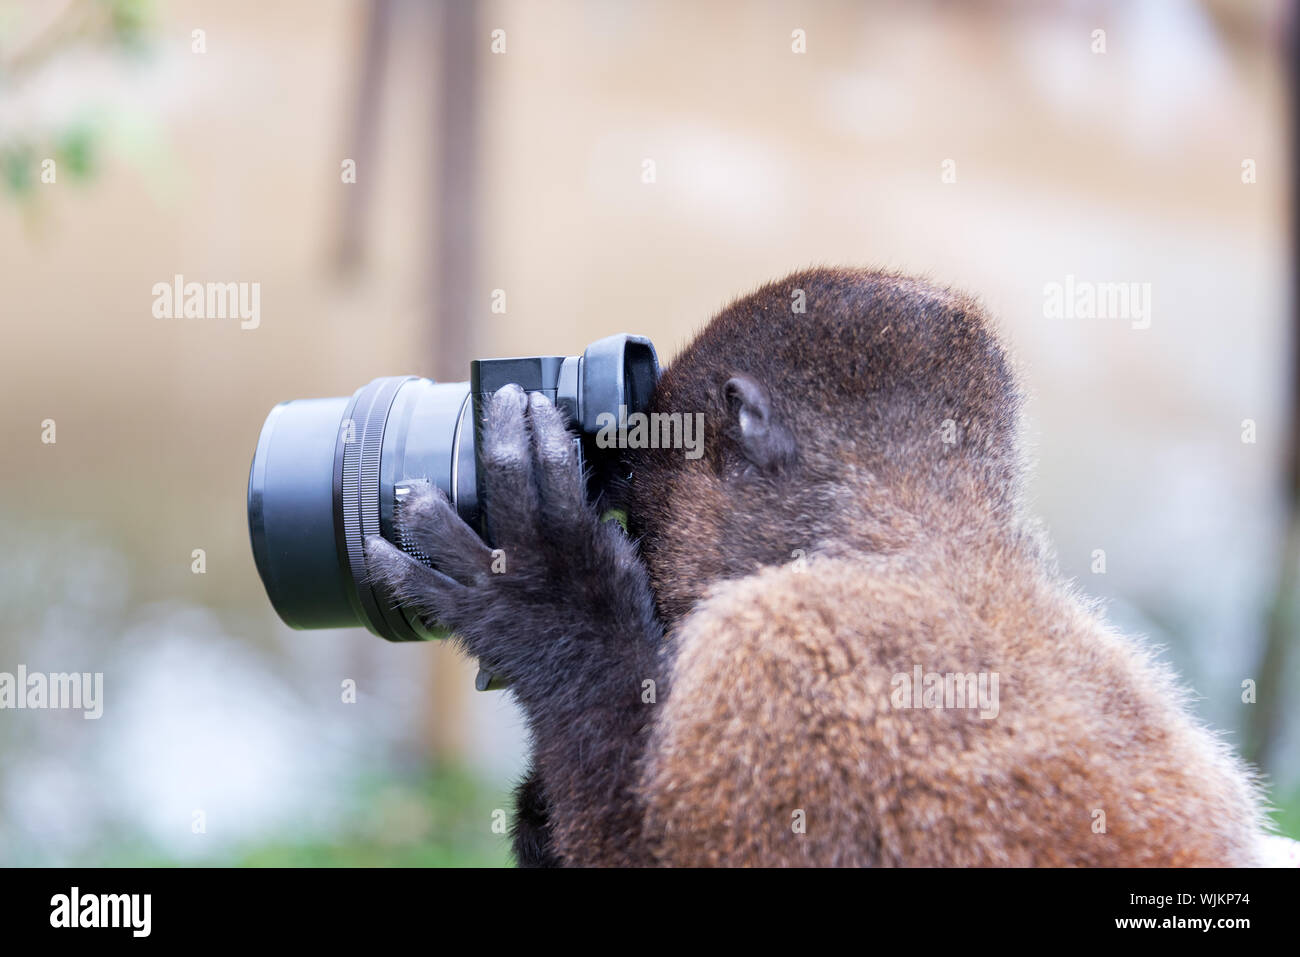 Close-up Of Woolly Monkey Looking Through Camera At Amazon Rainforest Stock Photo